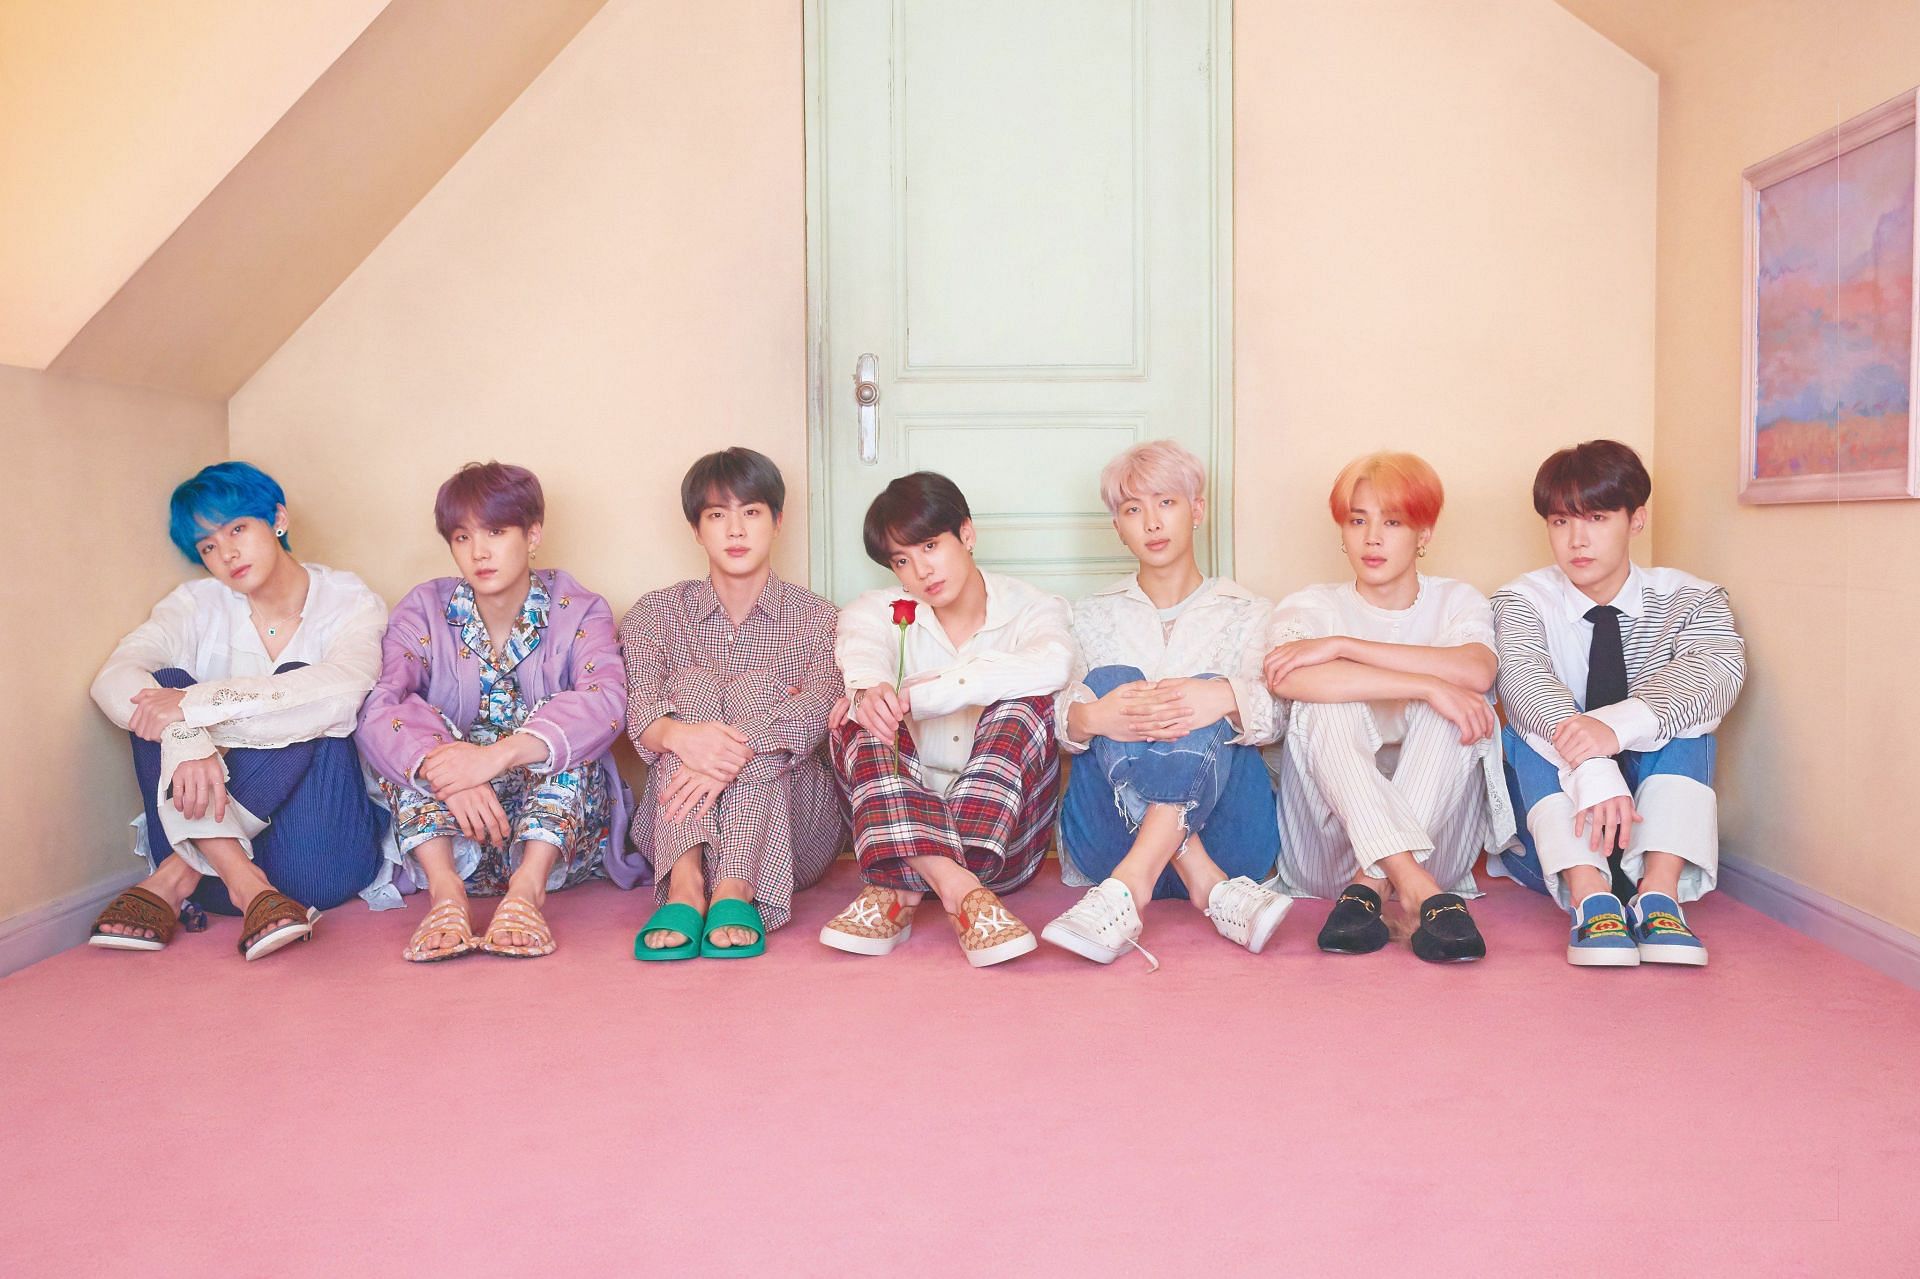 BTS&#039; Map of the Soul: Persona concept photo (Image via @BIGHIT_MUSIC/Twitter)